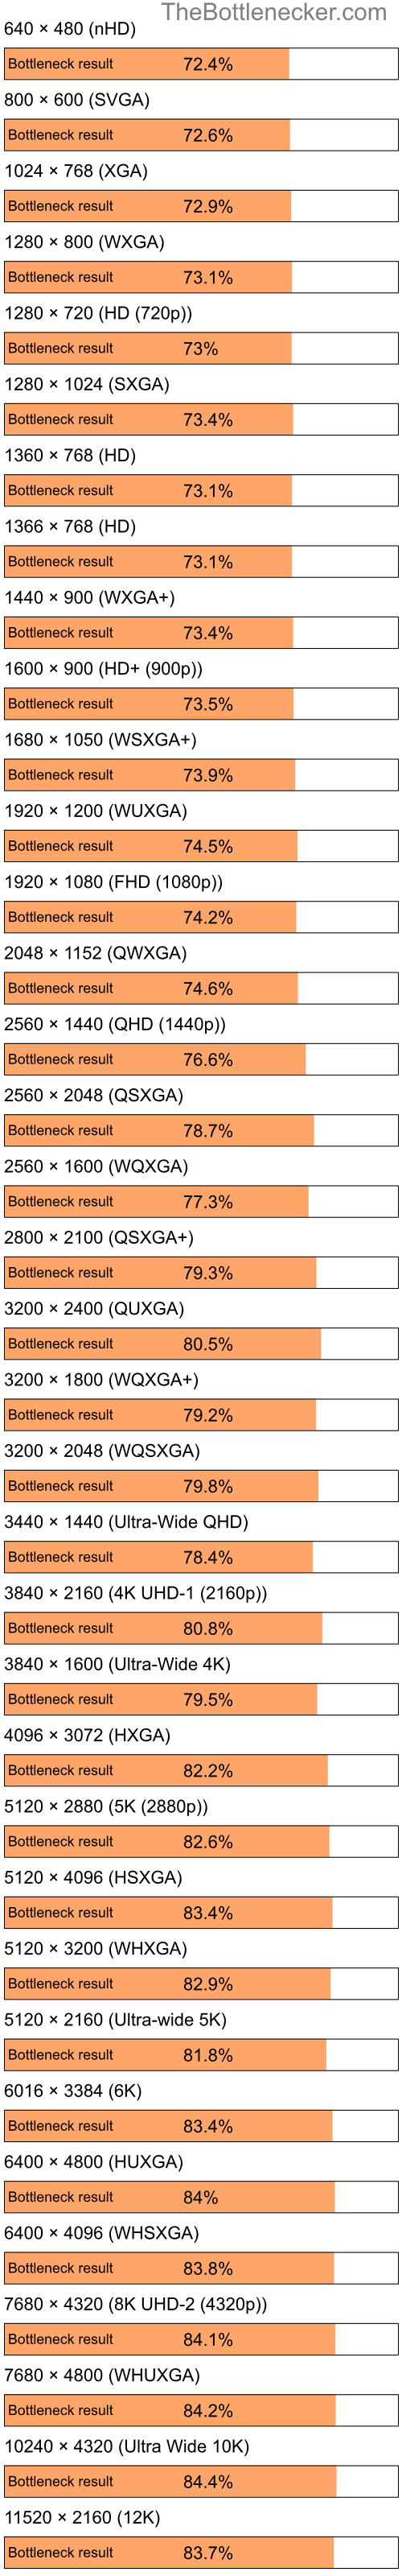 Bottleneck results by resolution for Intel Pentium 4 and AMD M860G with Mobility Radeon 4100 in Graphic Card Intense Tasks